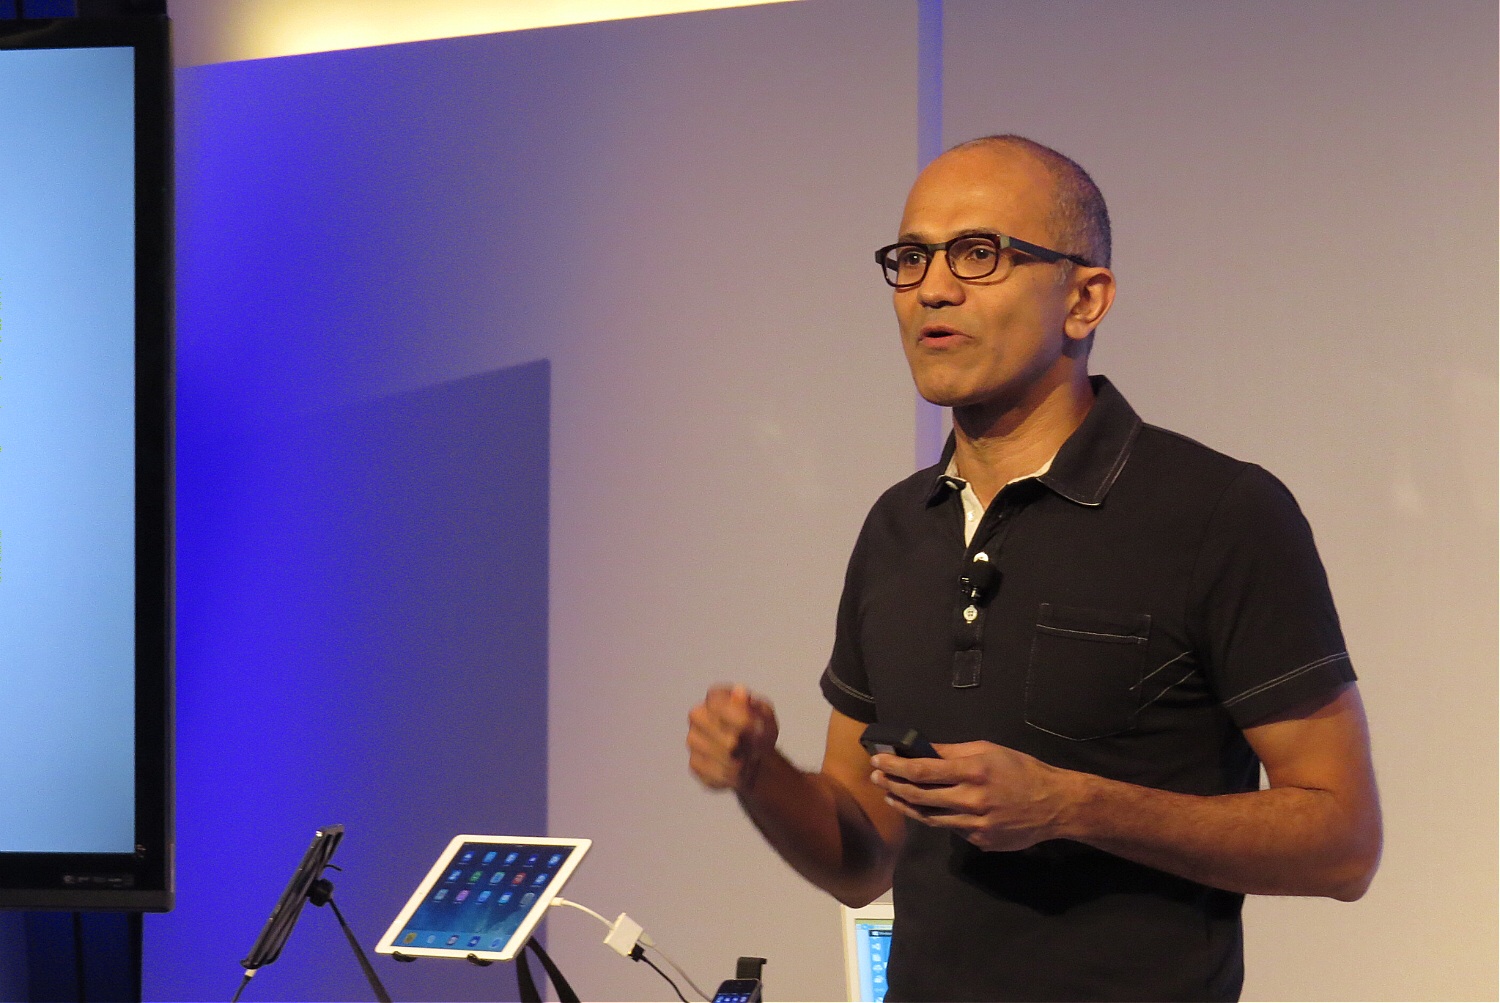 Microsoft CEO at the company's press event in San Francisco on March 27, 2014 (Harry McCracken / TIME)